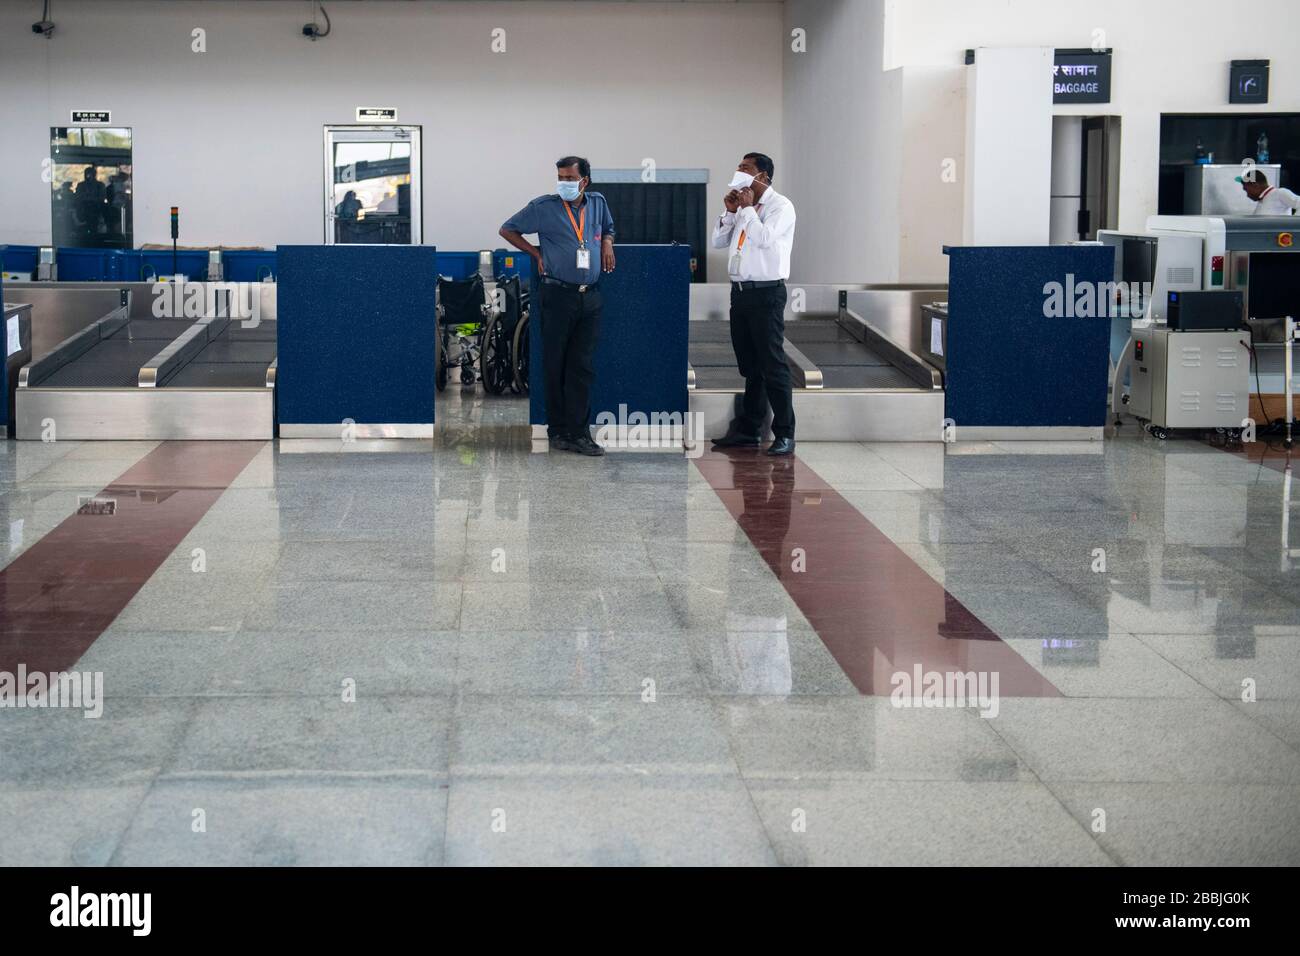 Airline staff wearing face masks conversing at a deserted airport in Khajuraho, Madhya Pradesh, India, during the international health crisis caused b Stock Photo